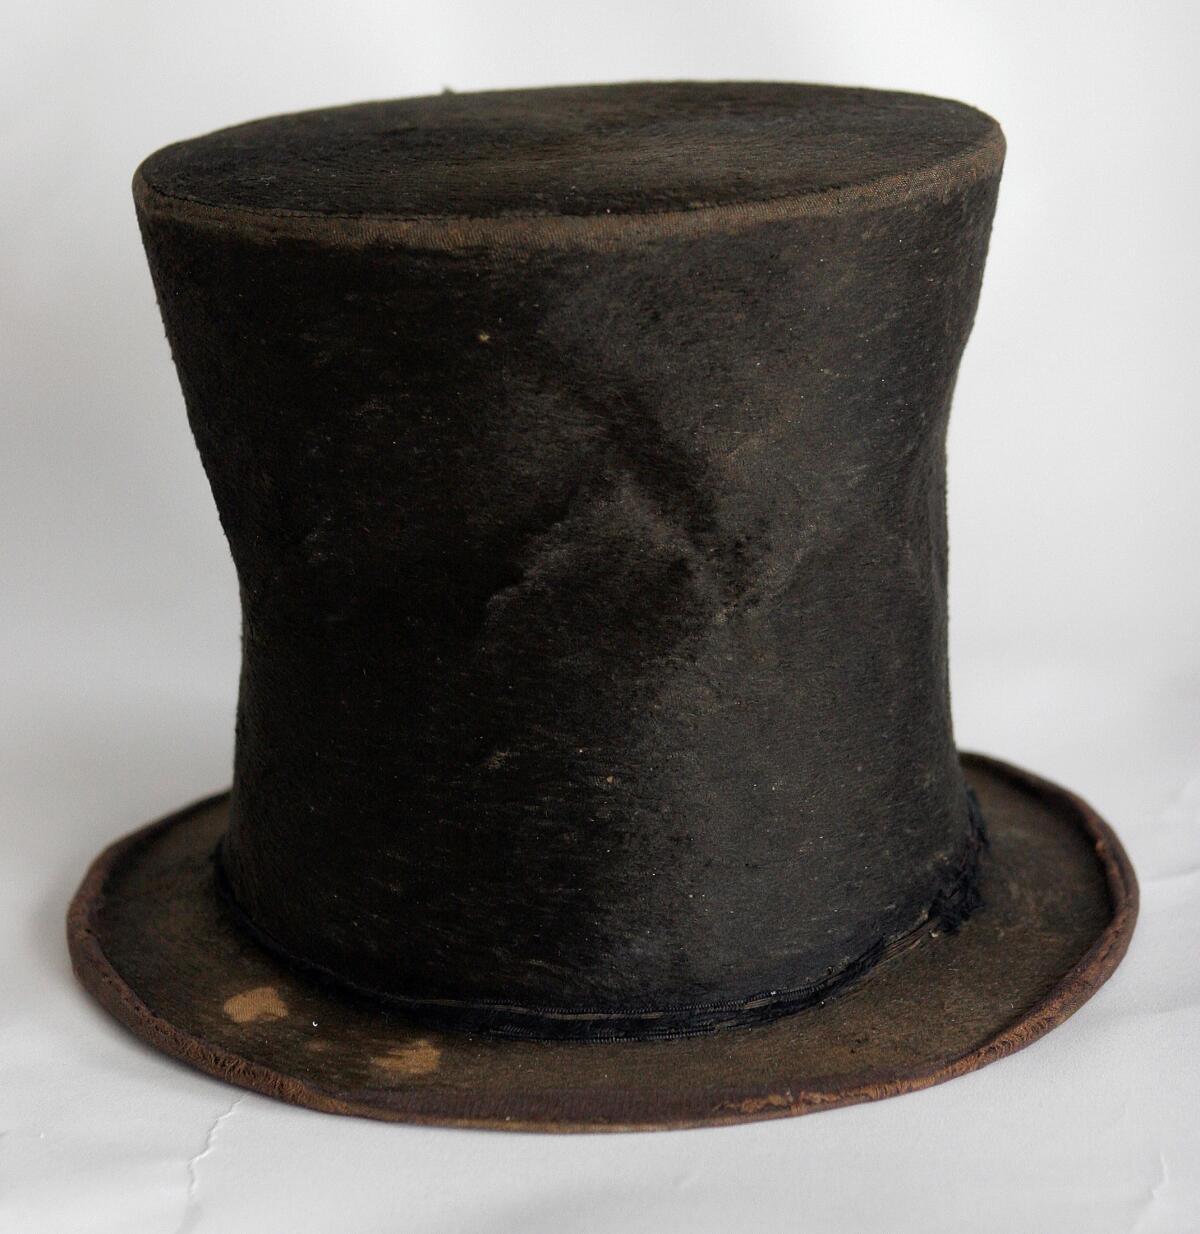 Lincoln stovepipe hat